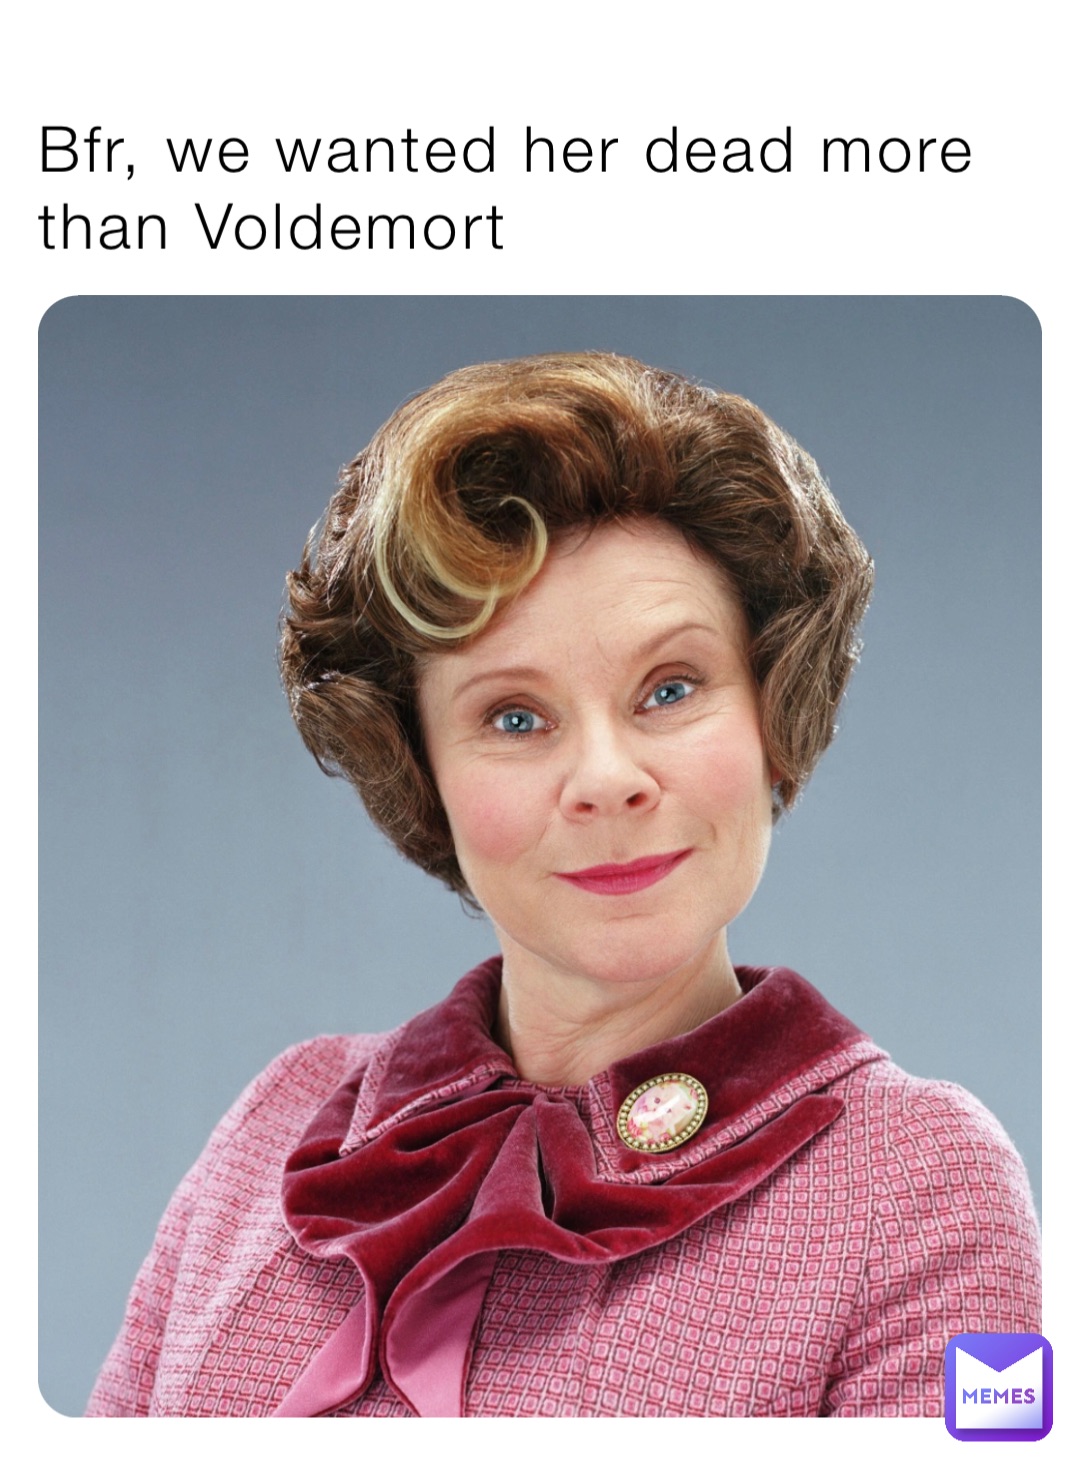 Bfr, we wanted her dead more than Voldemort